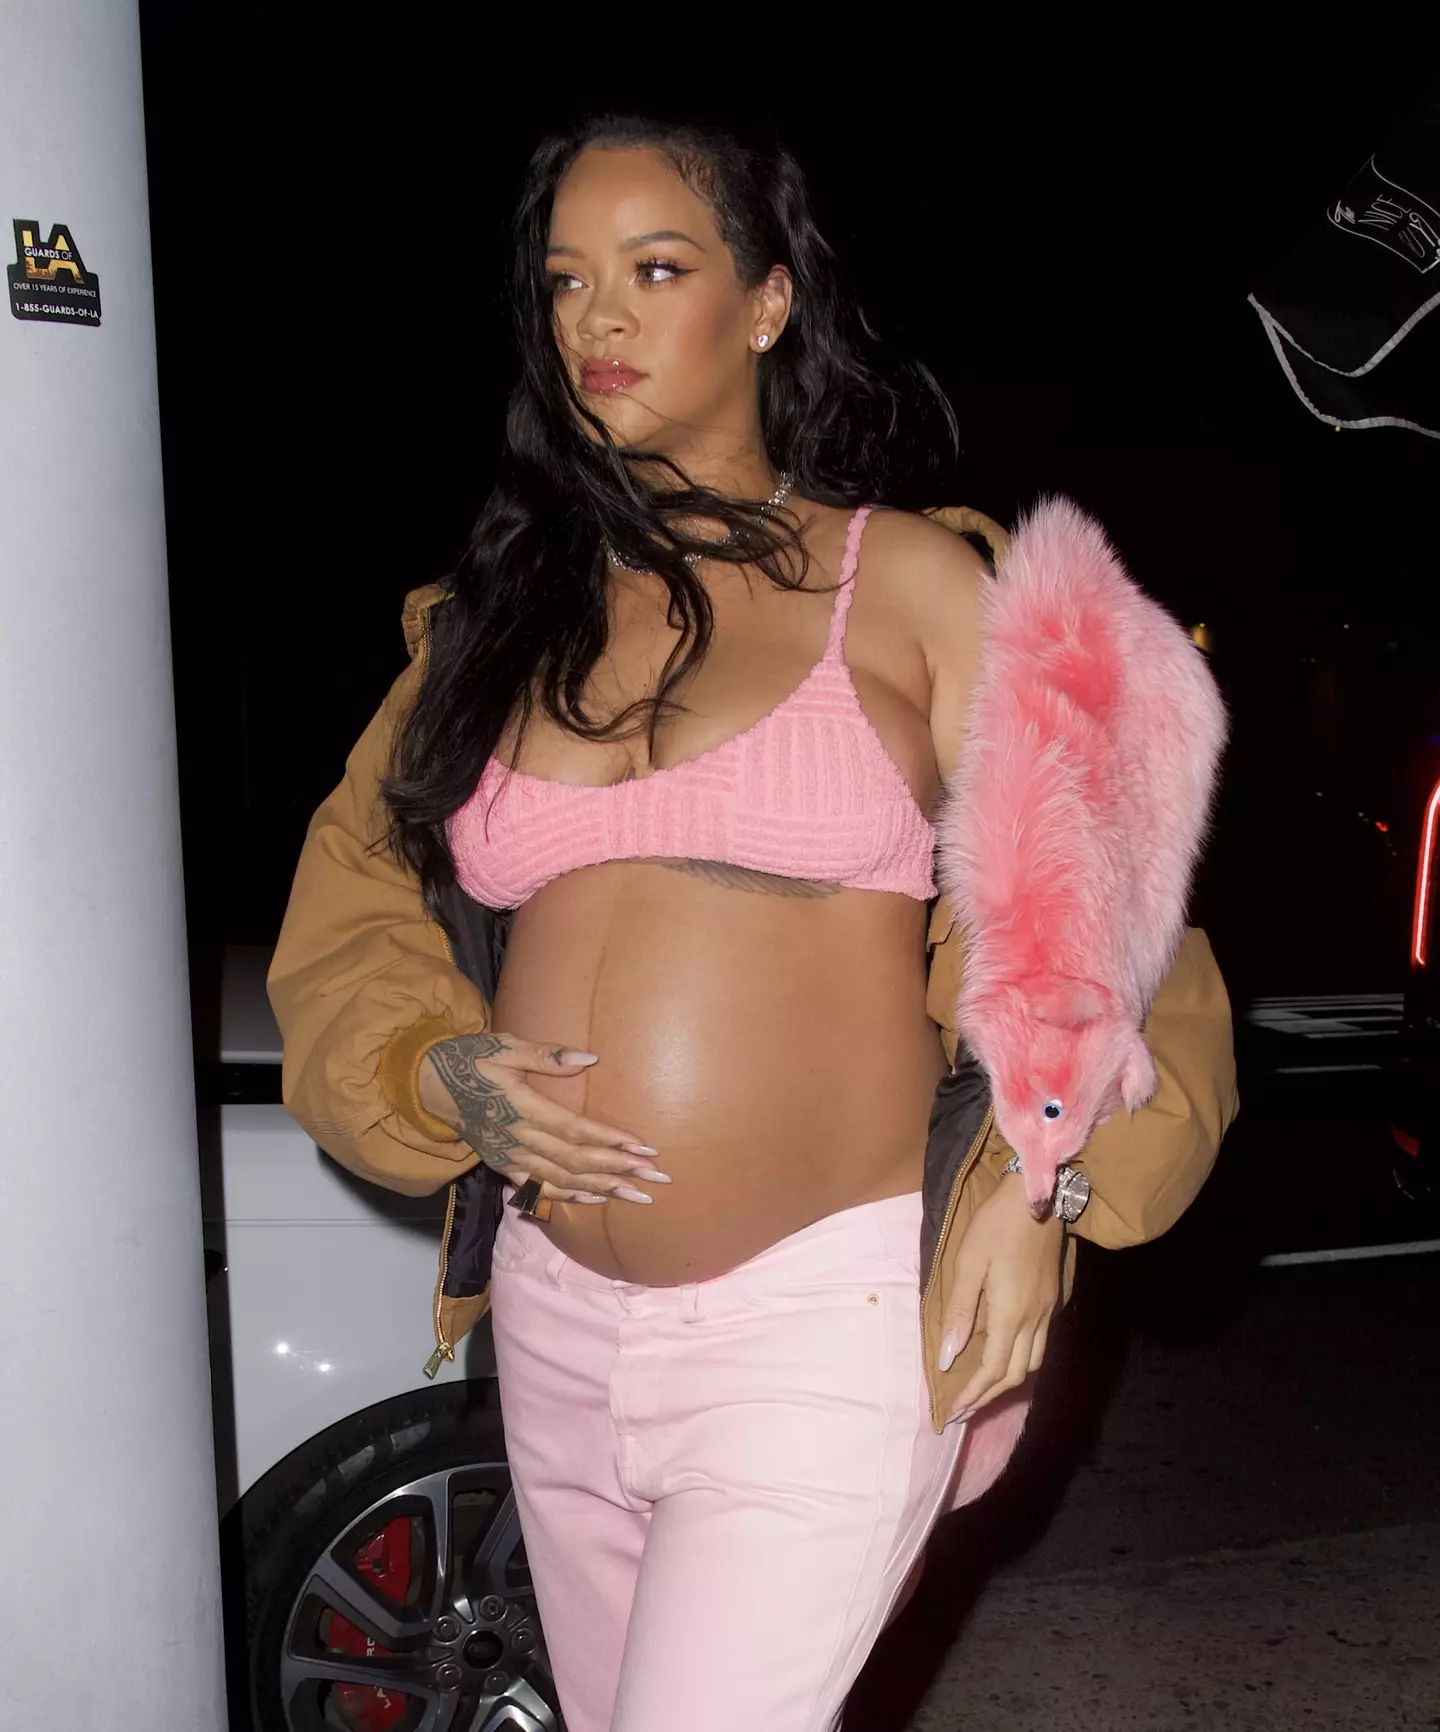 To Rihanna, “that dress is actually the closest thing to maternity clothes that I’ve worn so far." (Shutterstock).